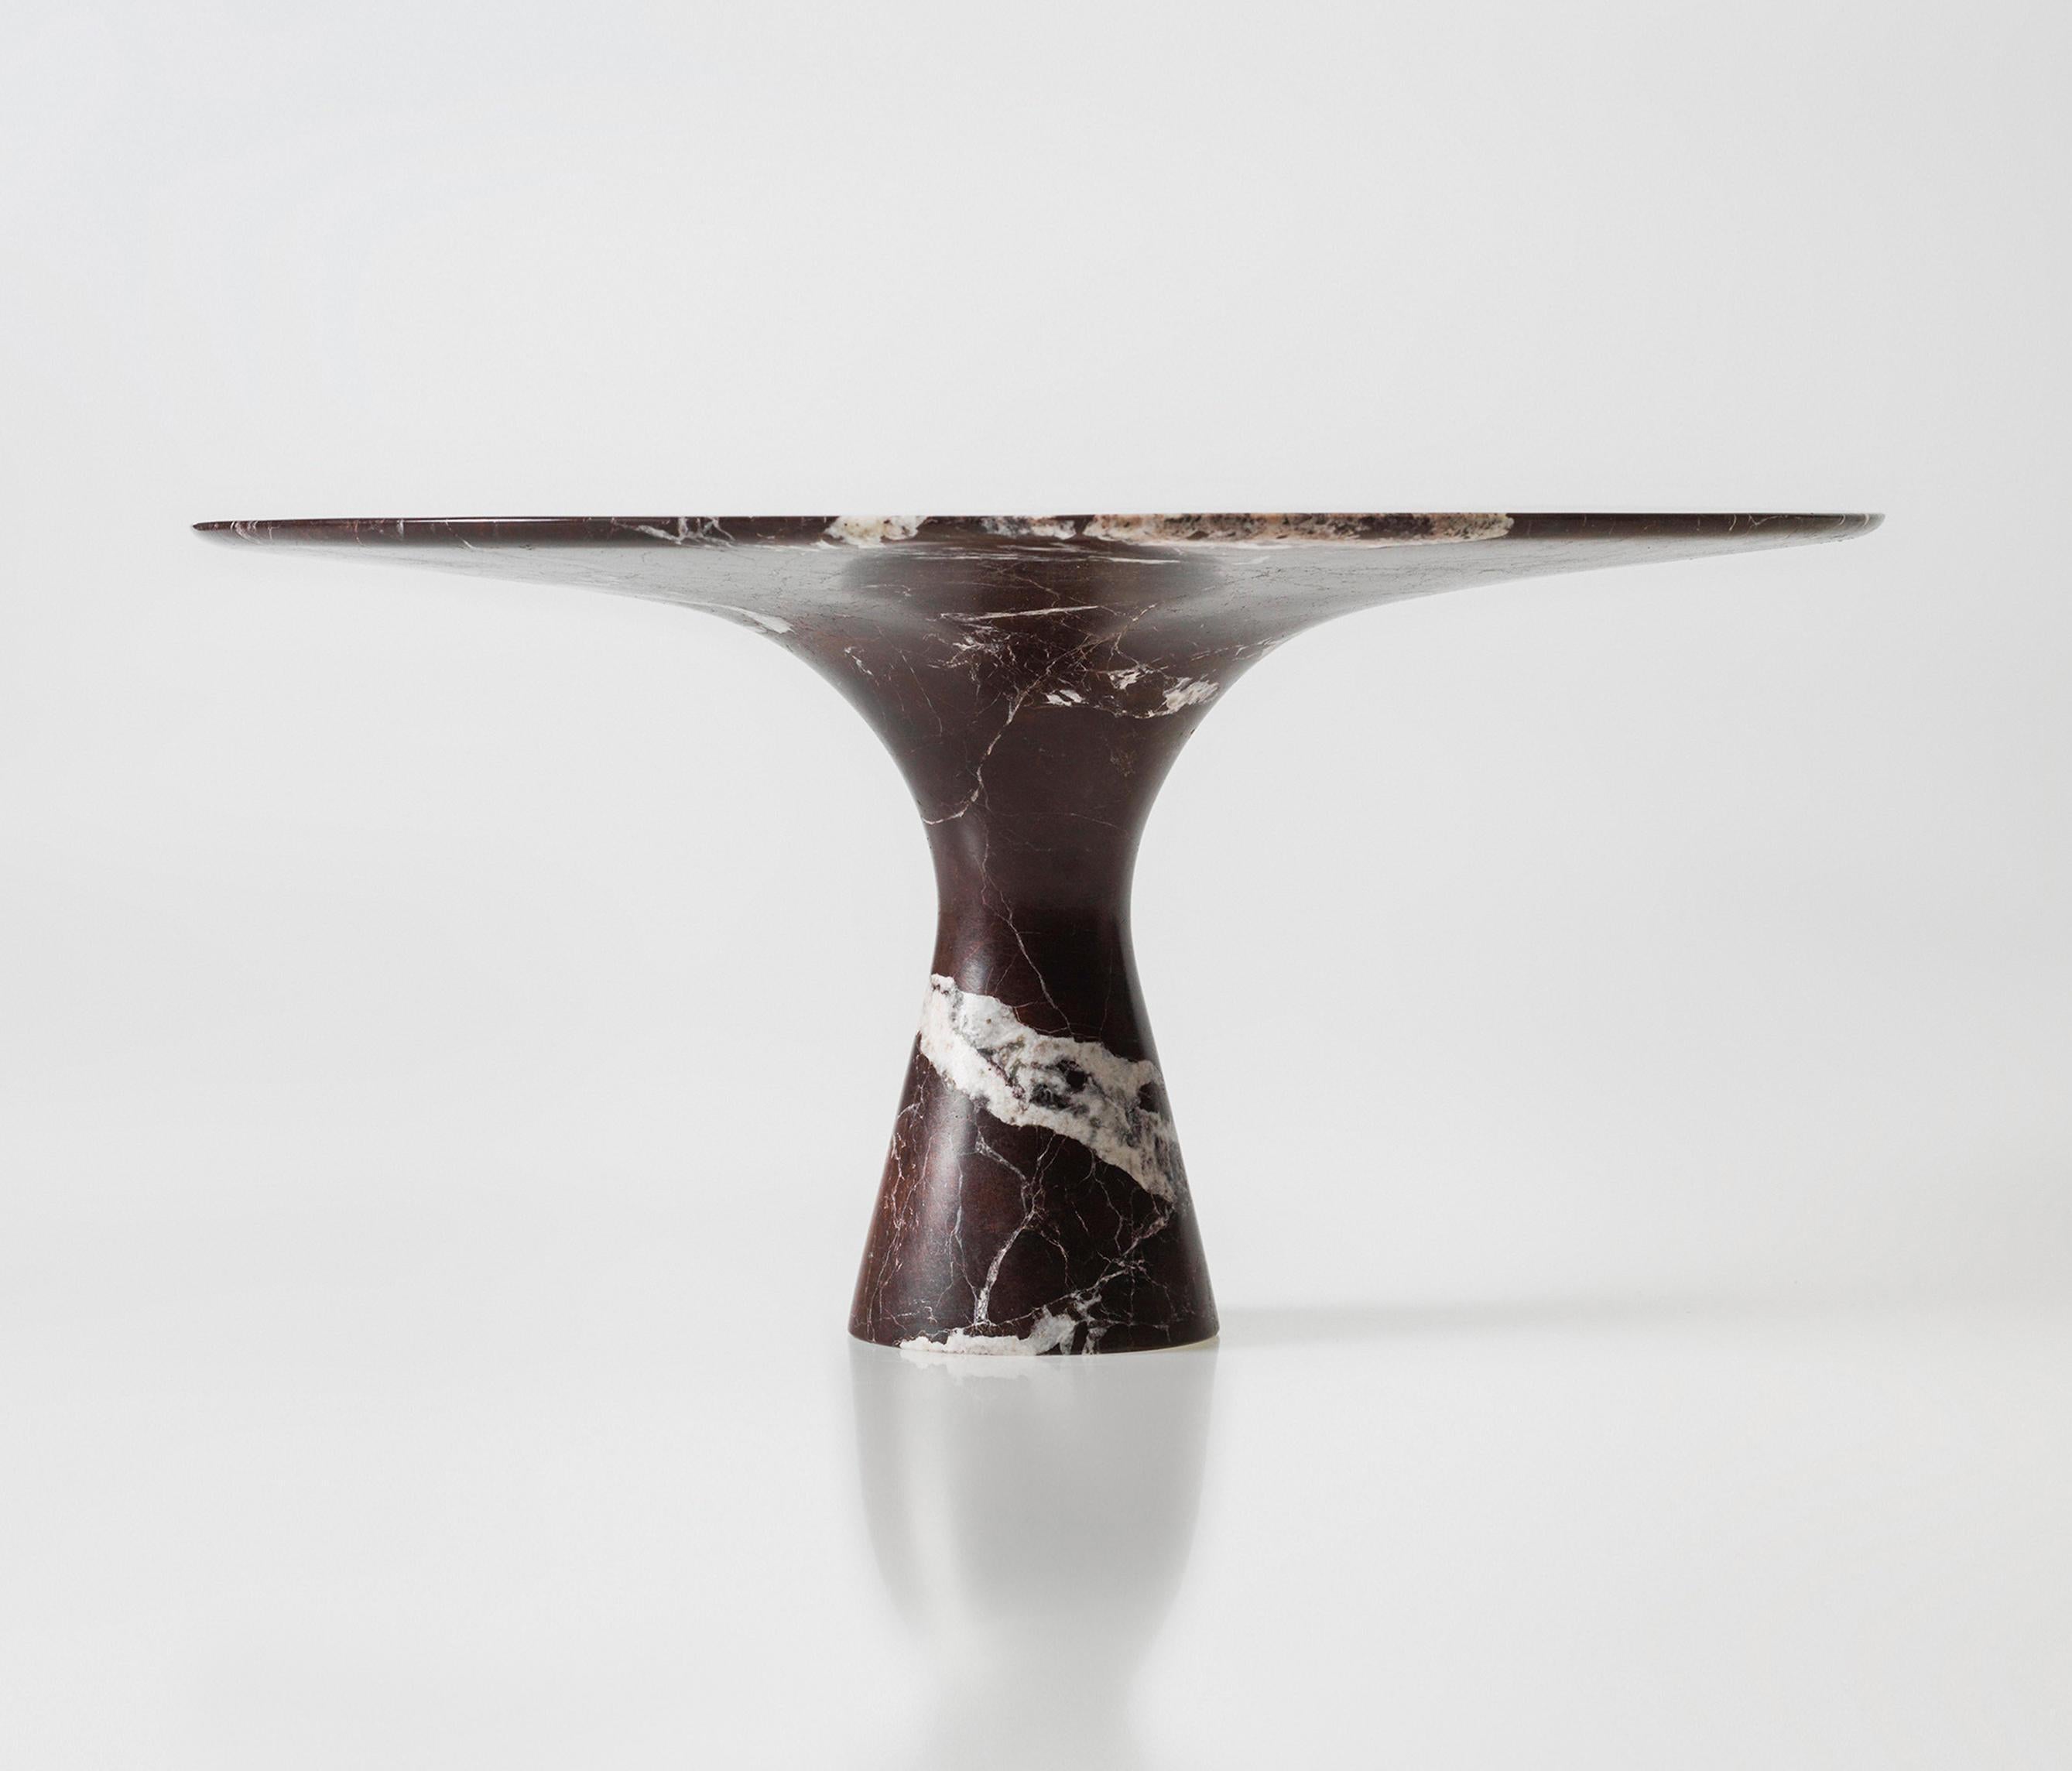 Rosso Lepanto Refined Contemporary Marble Dining Table 130/75
Dimensions: 130 x 75 cm
Materials: Rosso Lepanto

Angelo is the essence of a round table in natural stone, a sculptural shape in robust material with elegant lines and refined